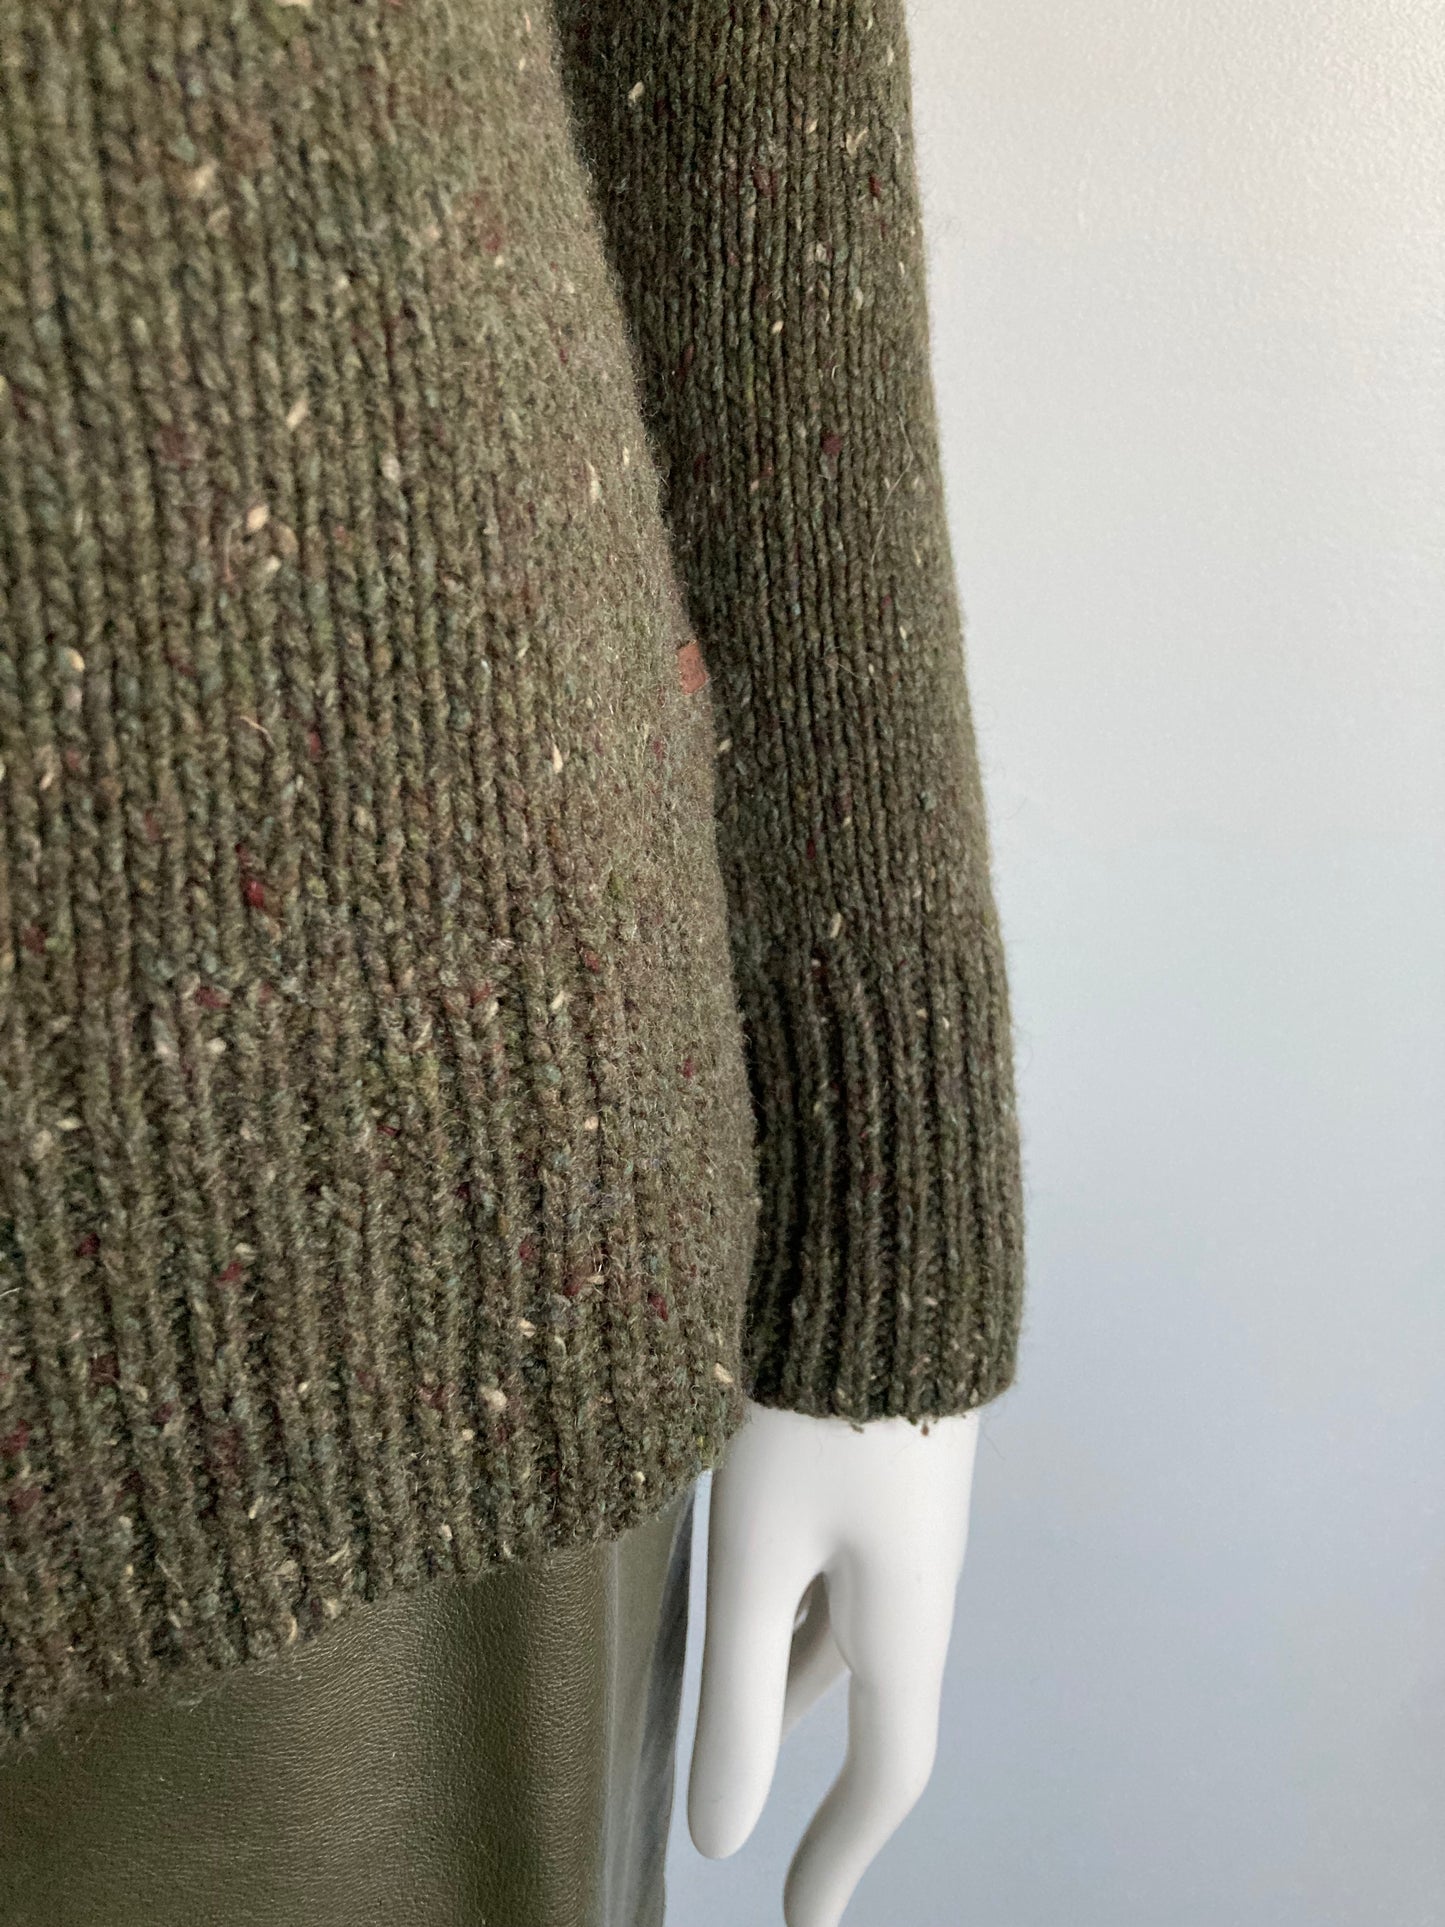 Modern Roots Sweater, Size M